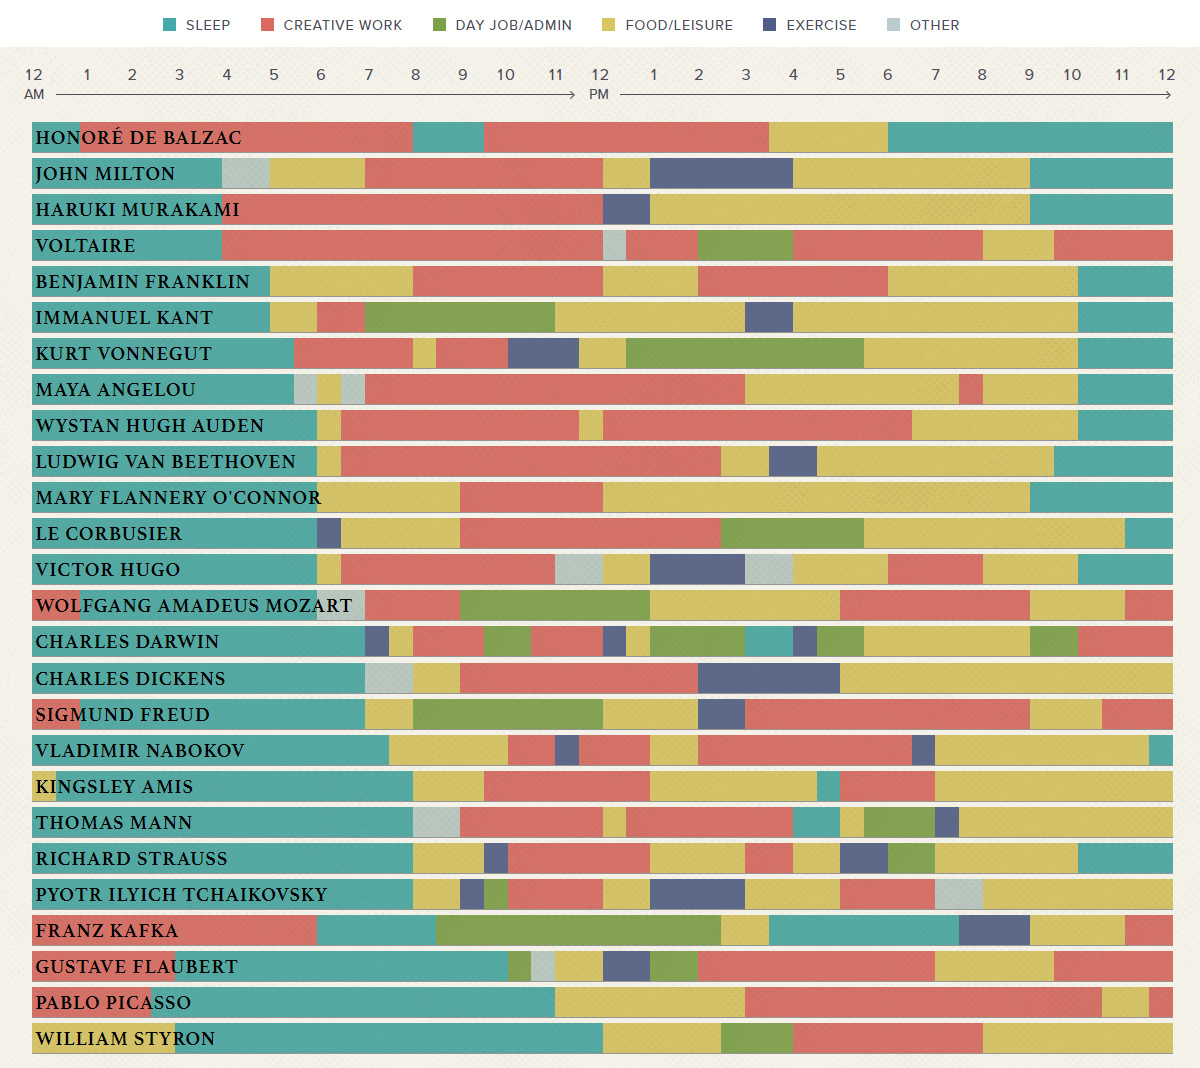 Visualizing the Daily Routines of Famous Creative People